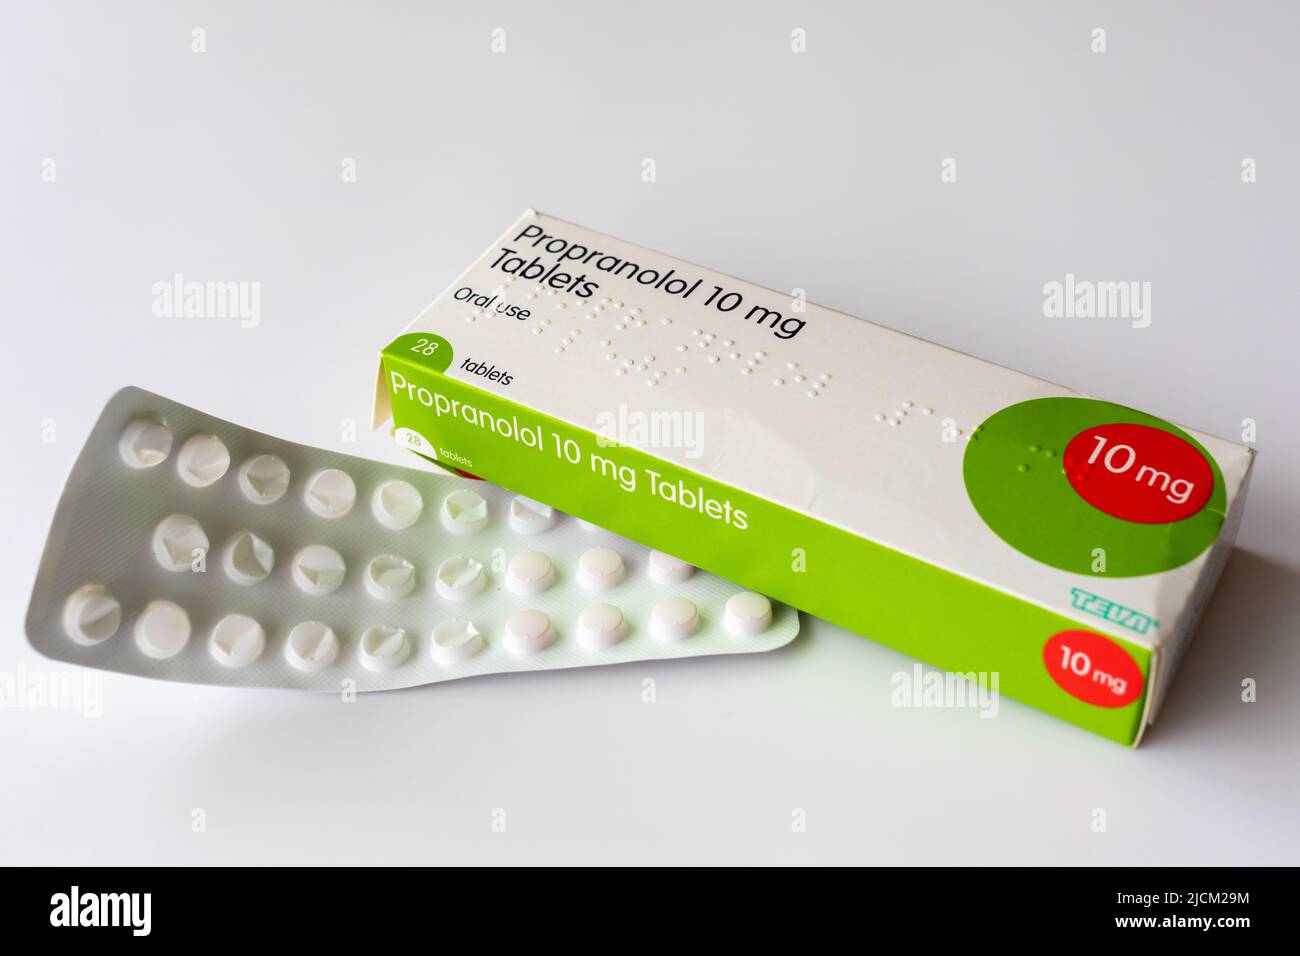 Box of Propranolol 10 mg tablets, a Beta blocker used to treat high blood  pressure, heart problems, tremors & anxiety Stock Photo - Alamy